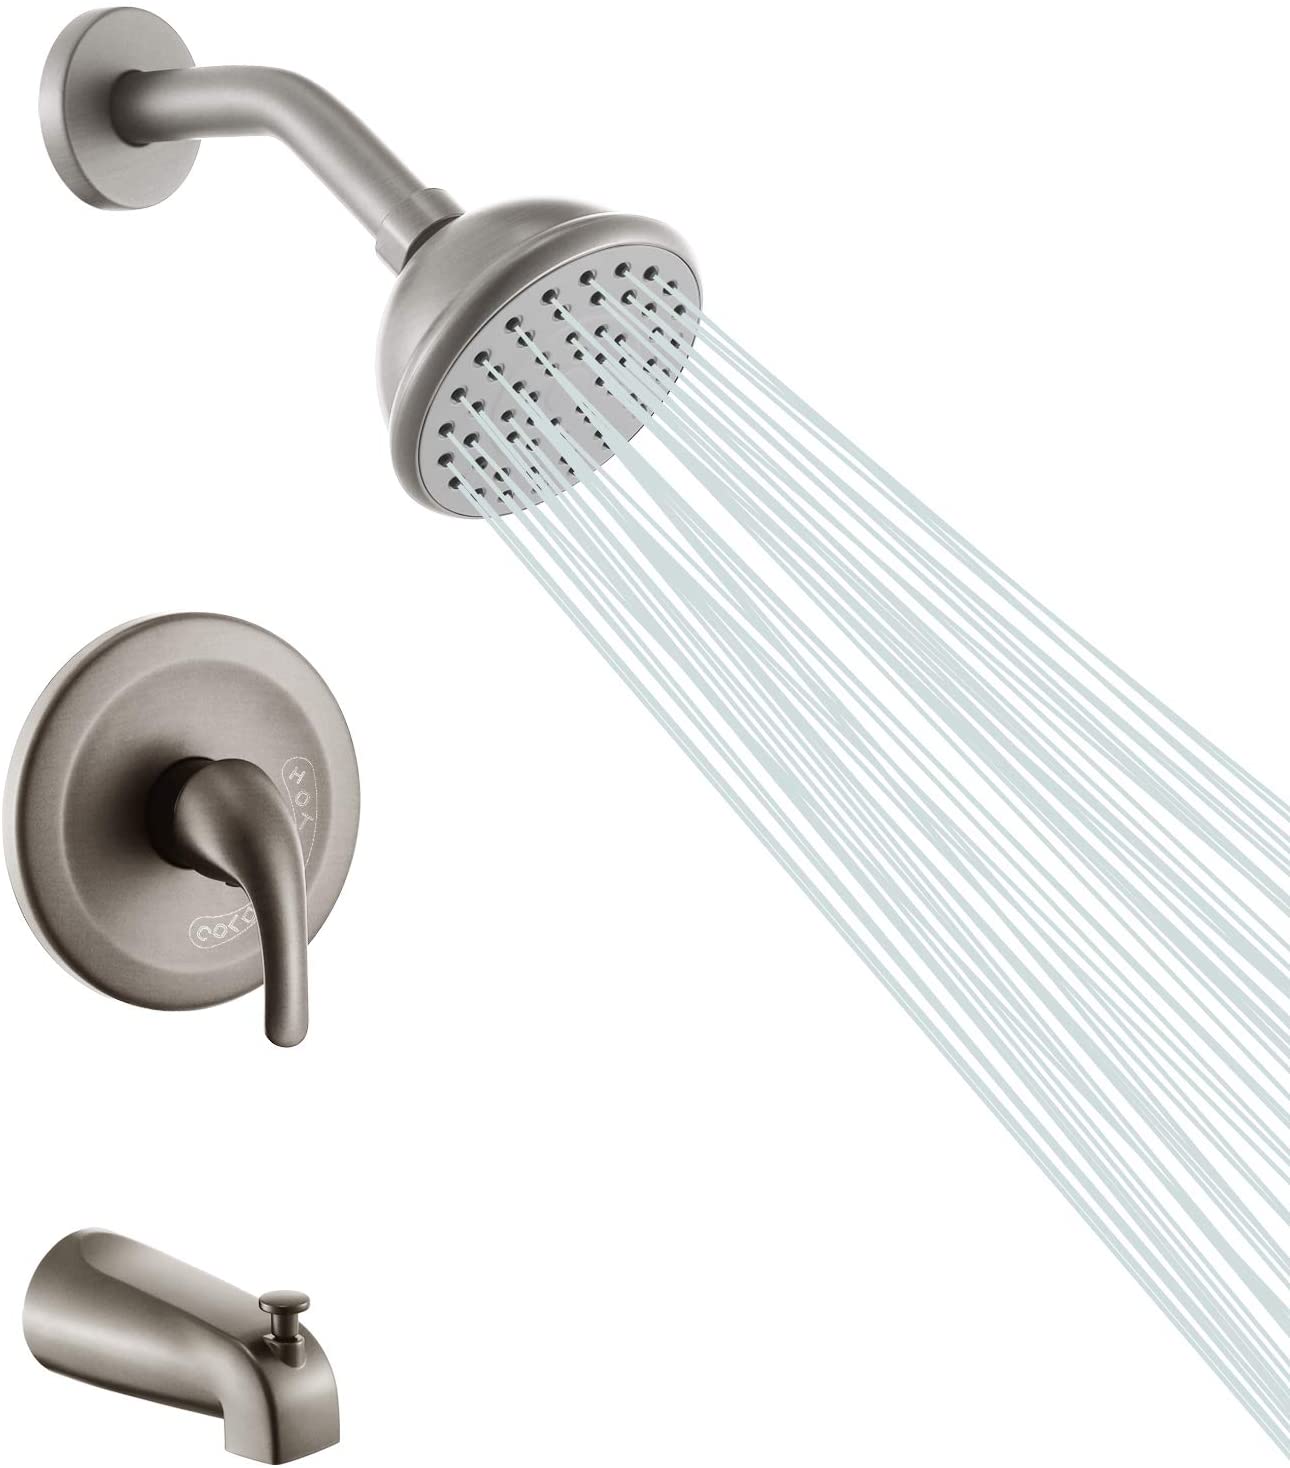 Chrome 6 Inch Shower Faucet wih Tub Spout Combo (Valve Included)